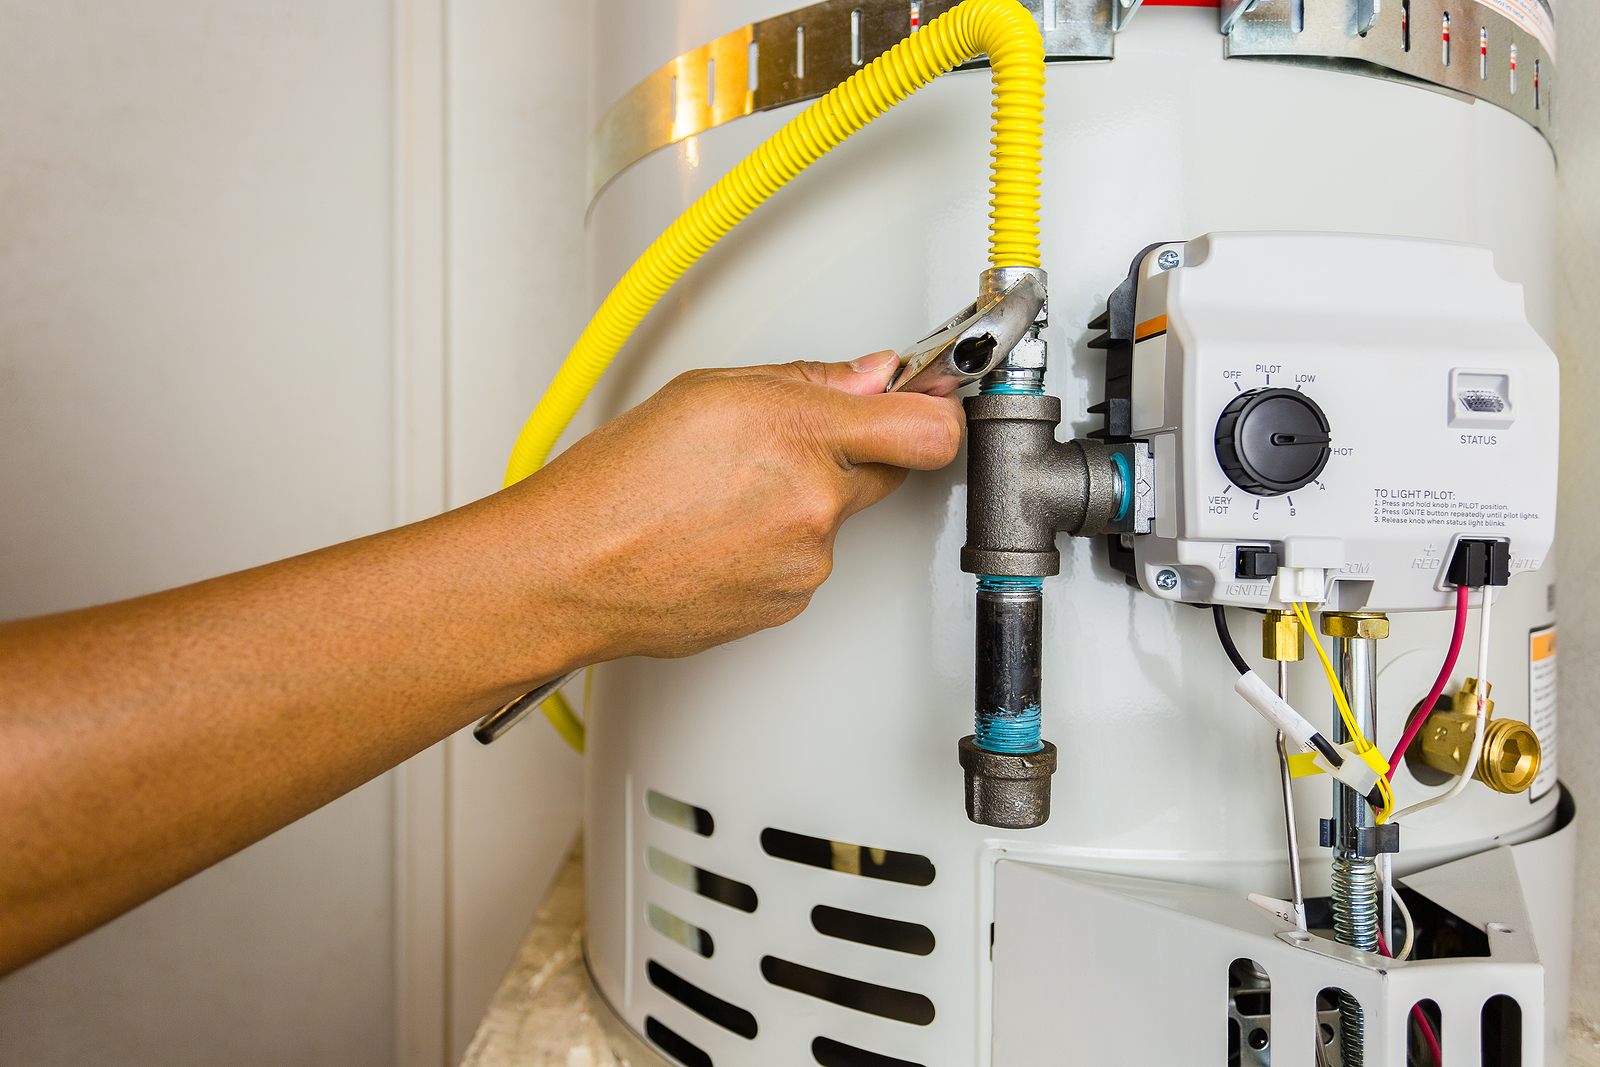 Eco Defender Water Heater How To Reset 5 Issues That Could Trip the Water Heater Reset Button | Waldman Plumbing